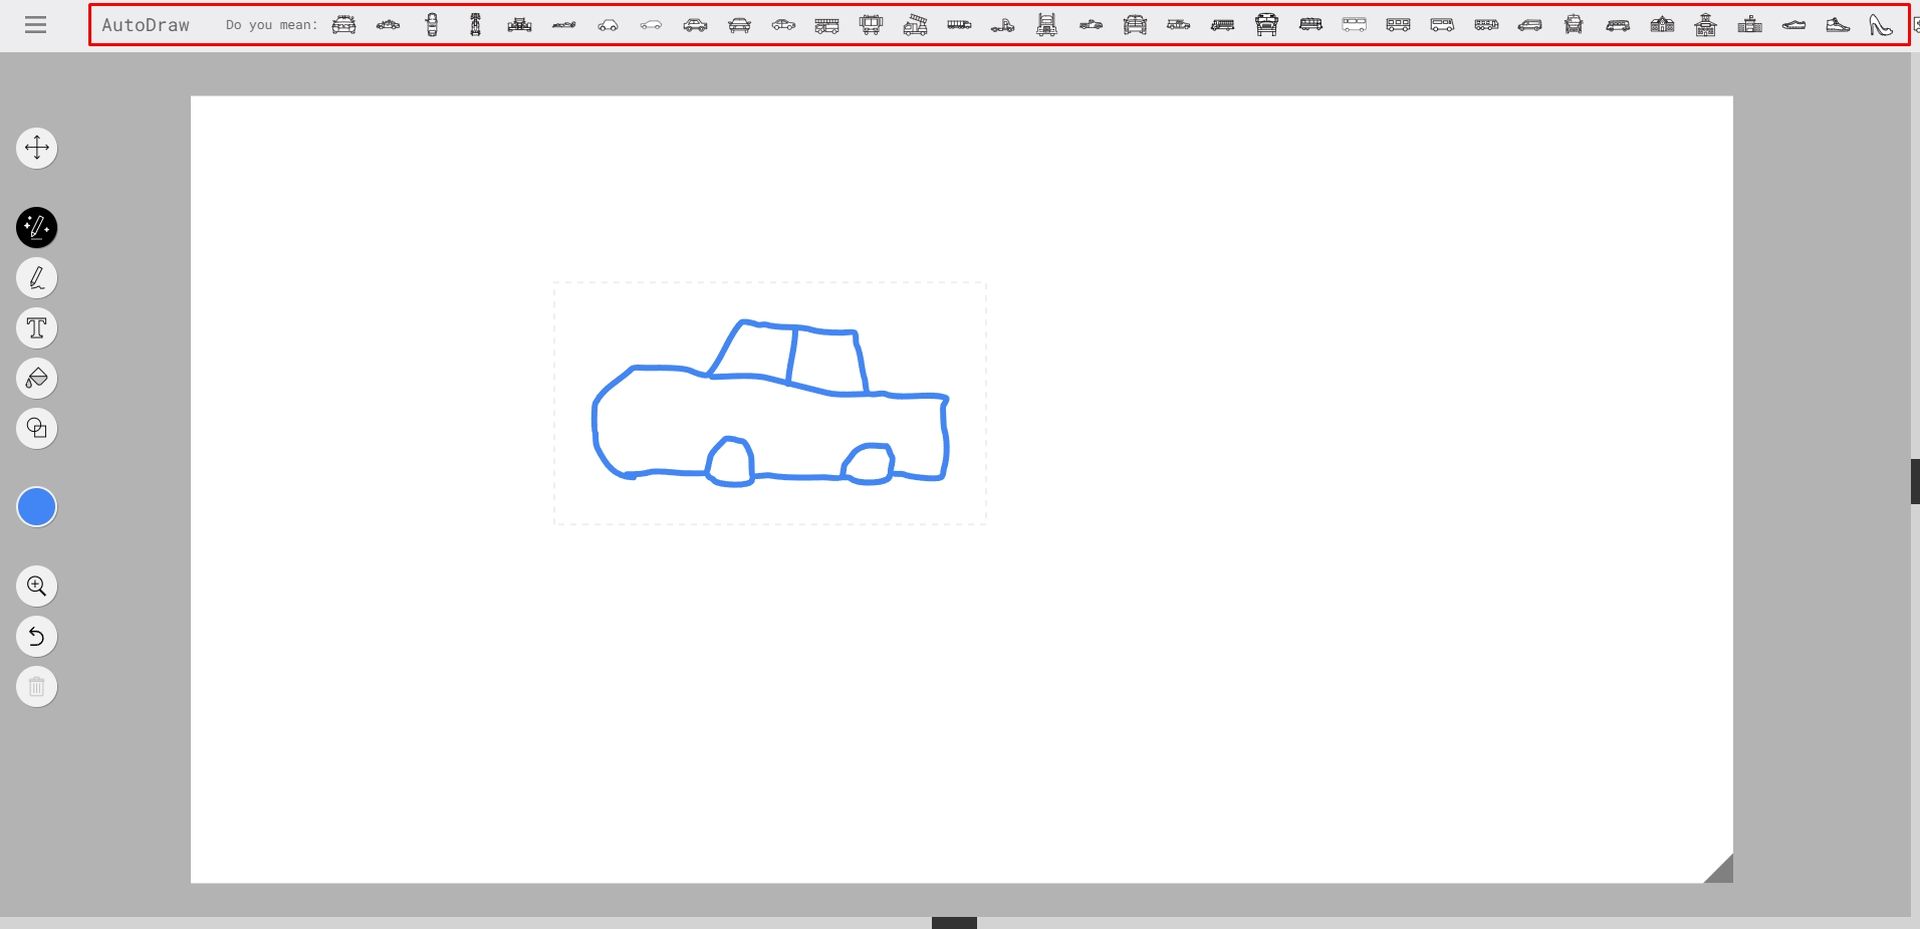 AutoDraw is a new kind of drawing tool that pairs the magic of